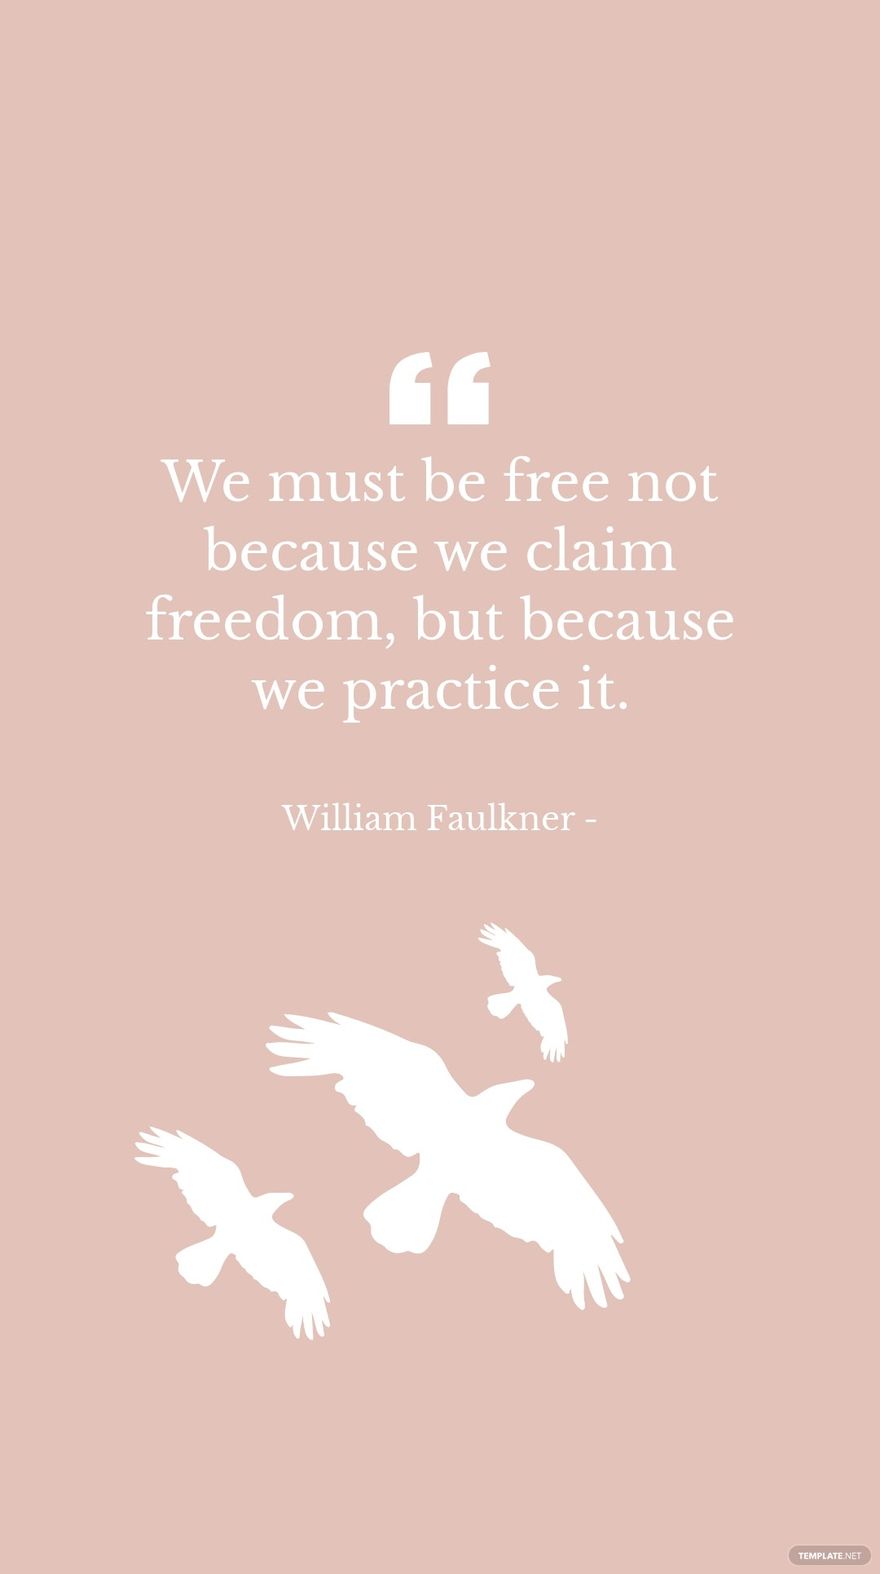 William Faulkner - We must be free not because we claim freedom, but because we practice it.